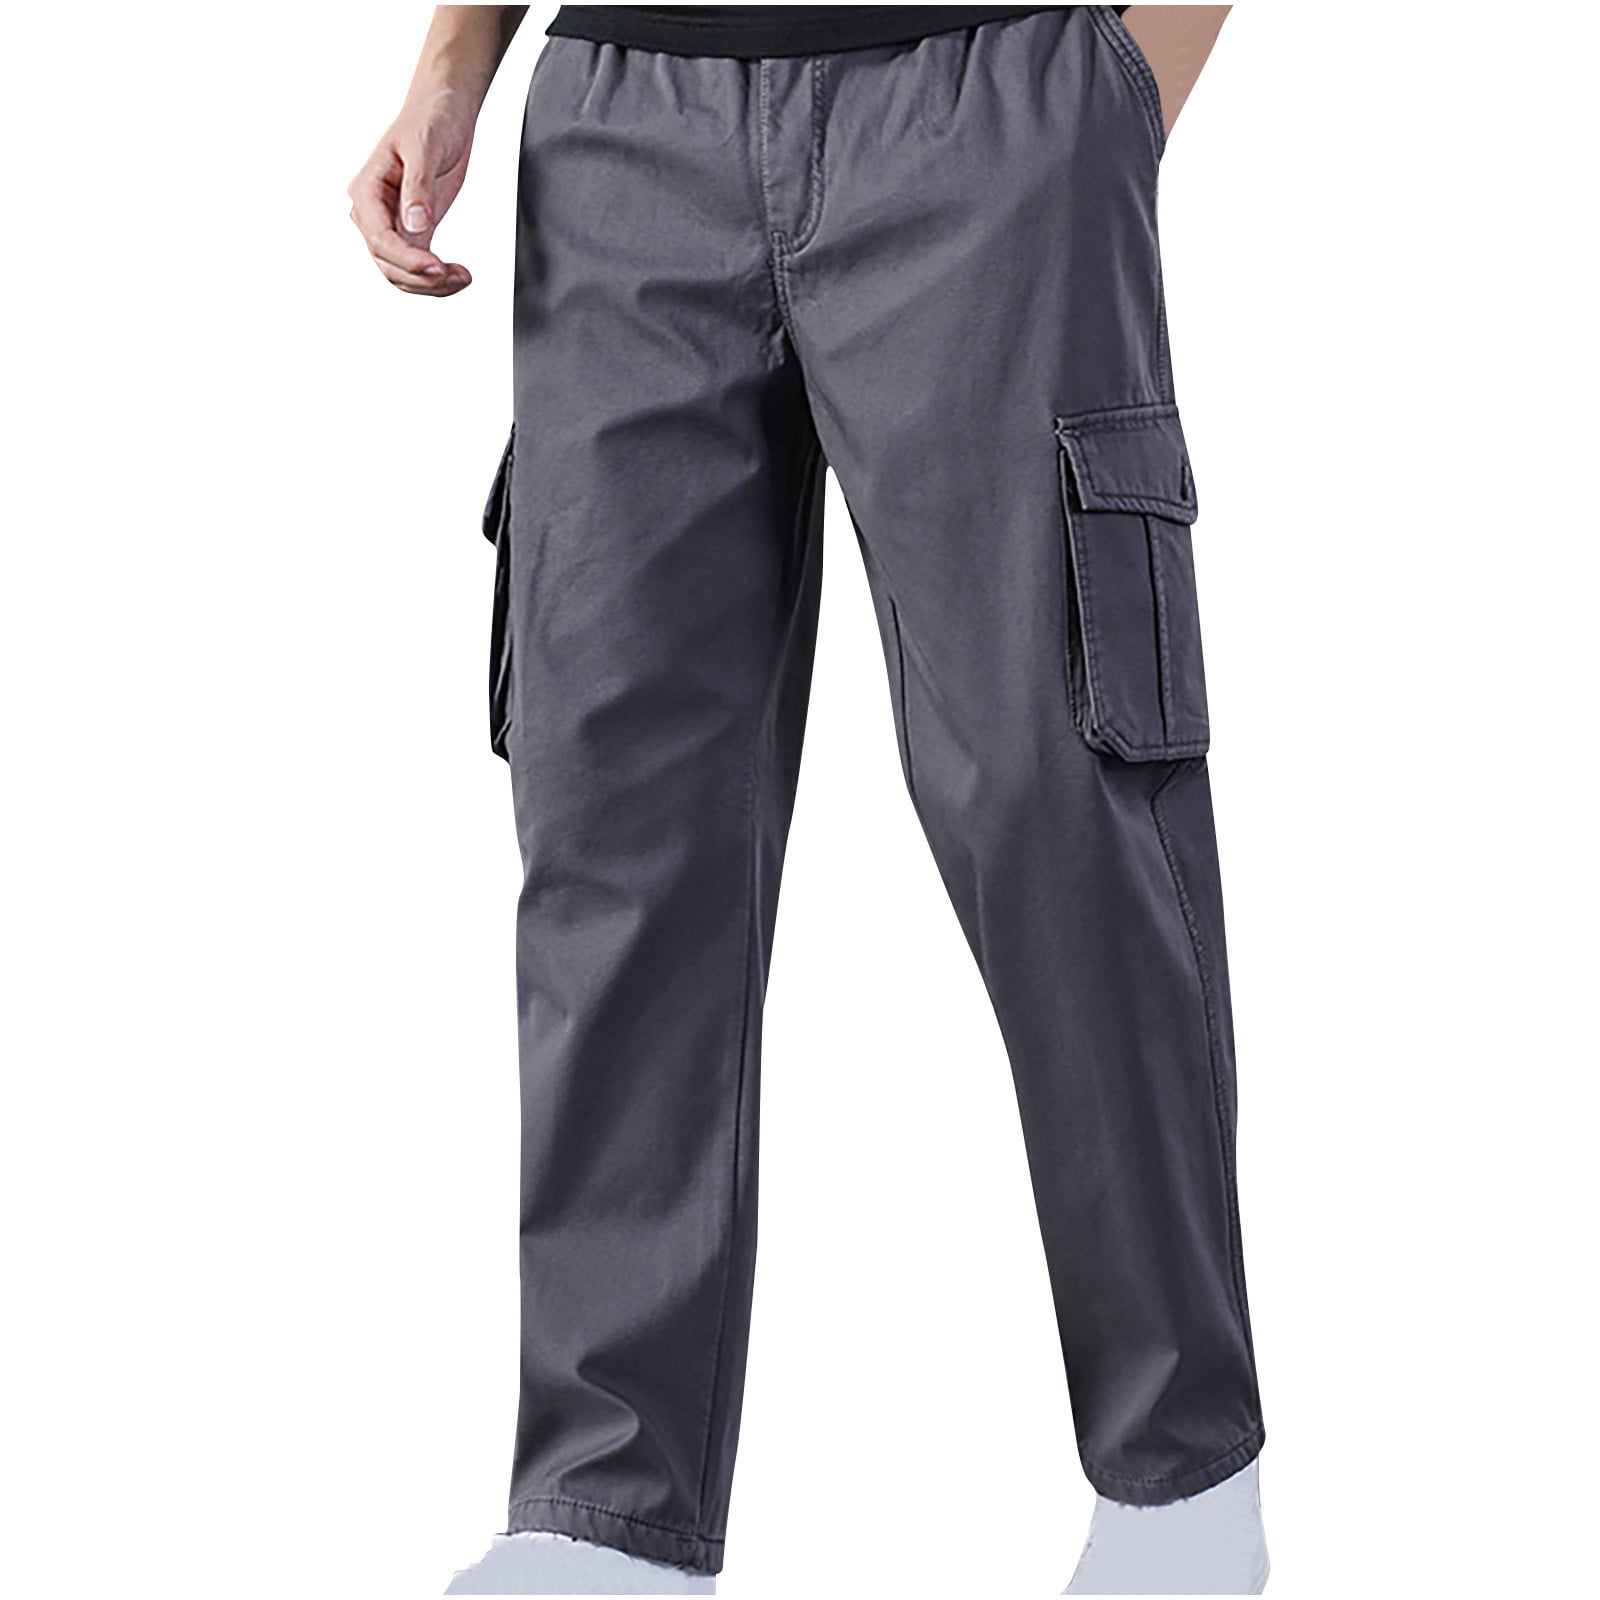 RYRJJ Women's Cargo Capris Hiking Pants Lightweight Quick Dry Outdoor  Athletic Travel Casual Loose Comfy Jogger Sweatpants with Zipper